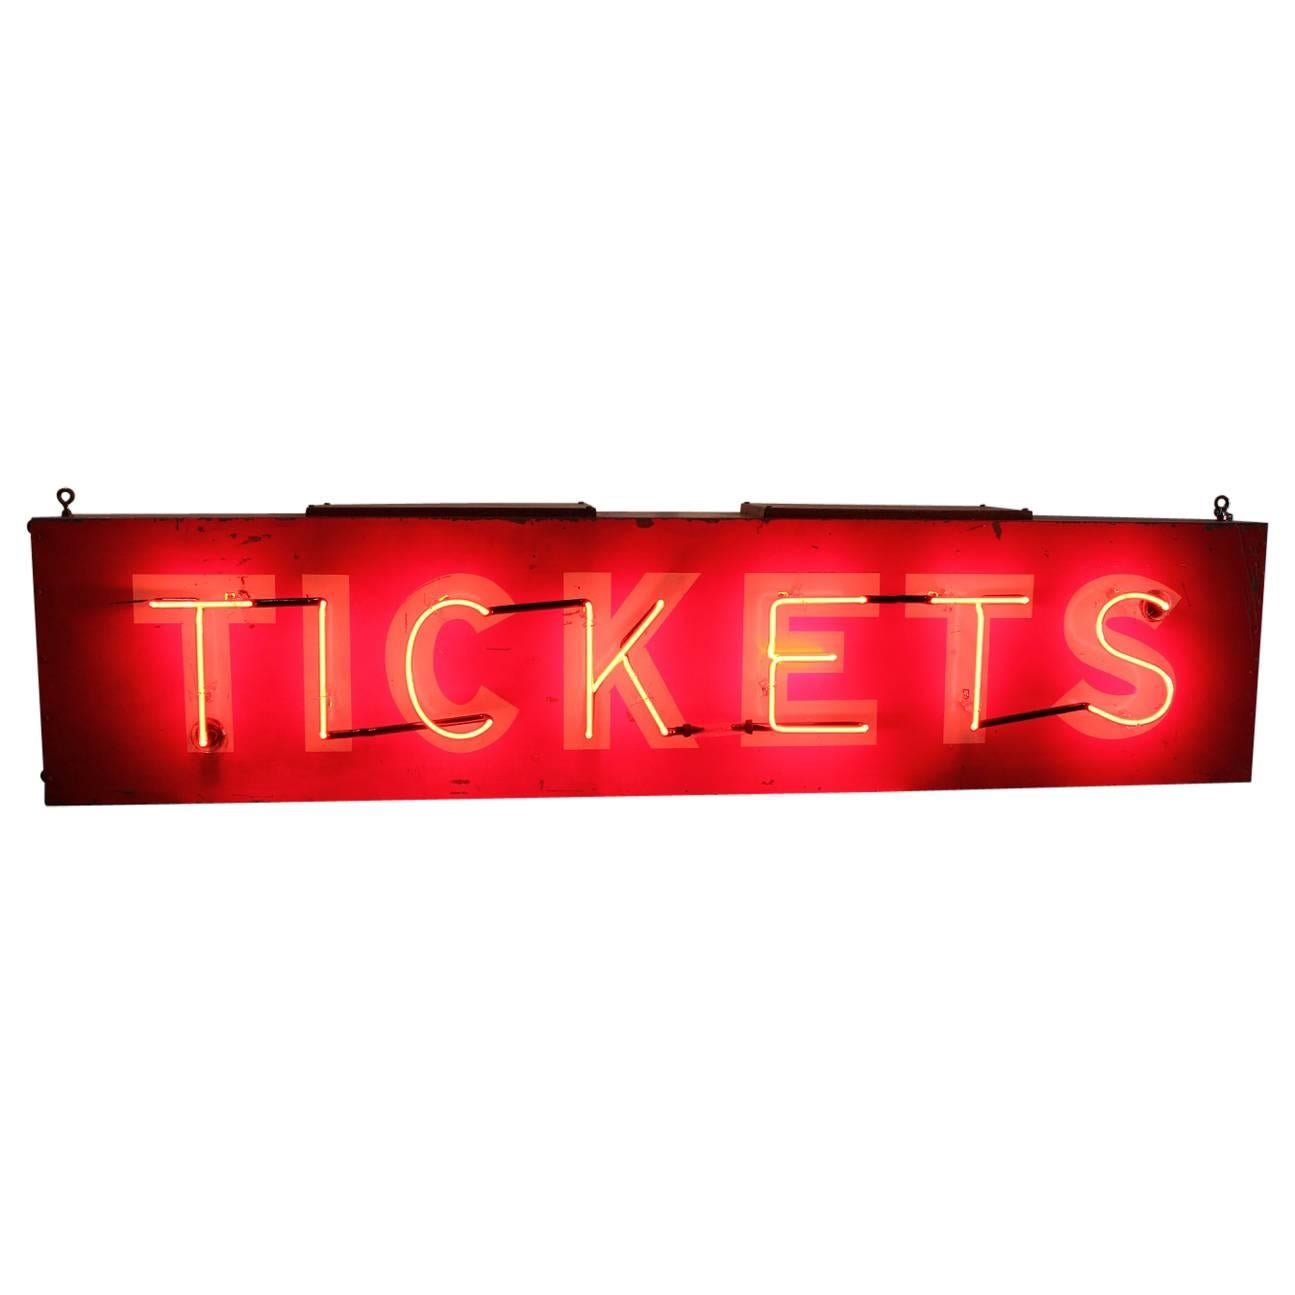 1950s American Neon Sign "TICKETS"